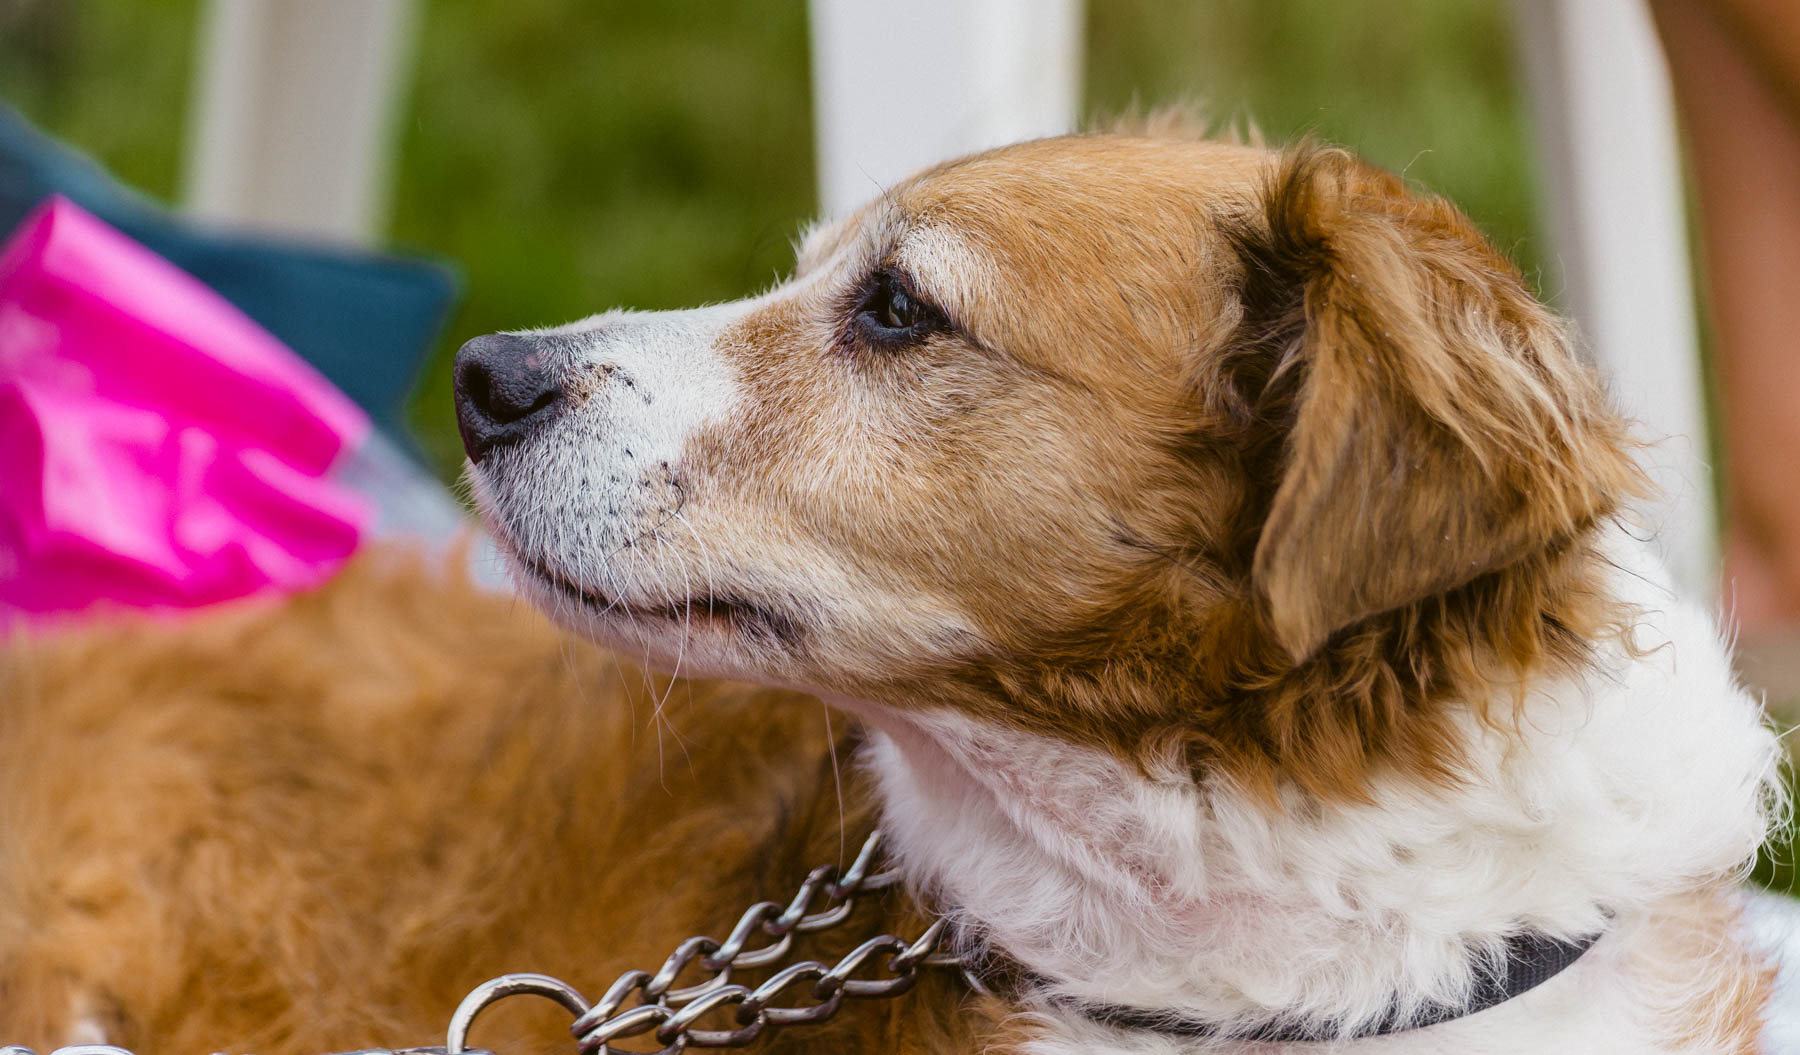 The Aldbourne Doggy Day August 2015